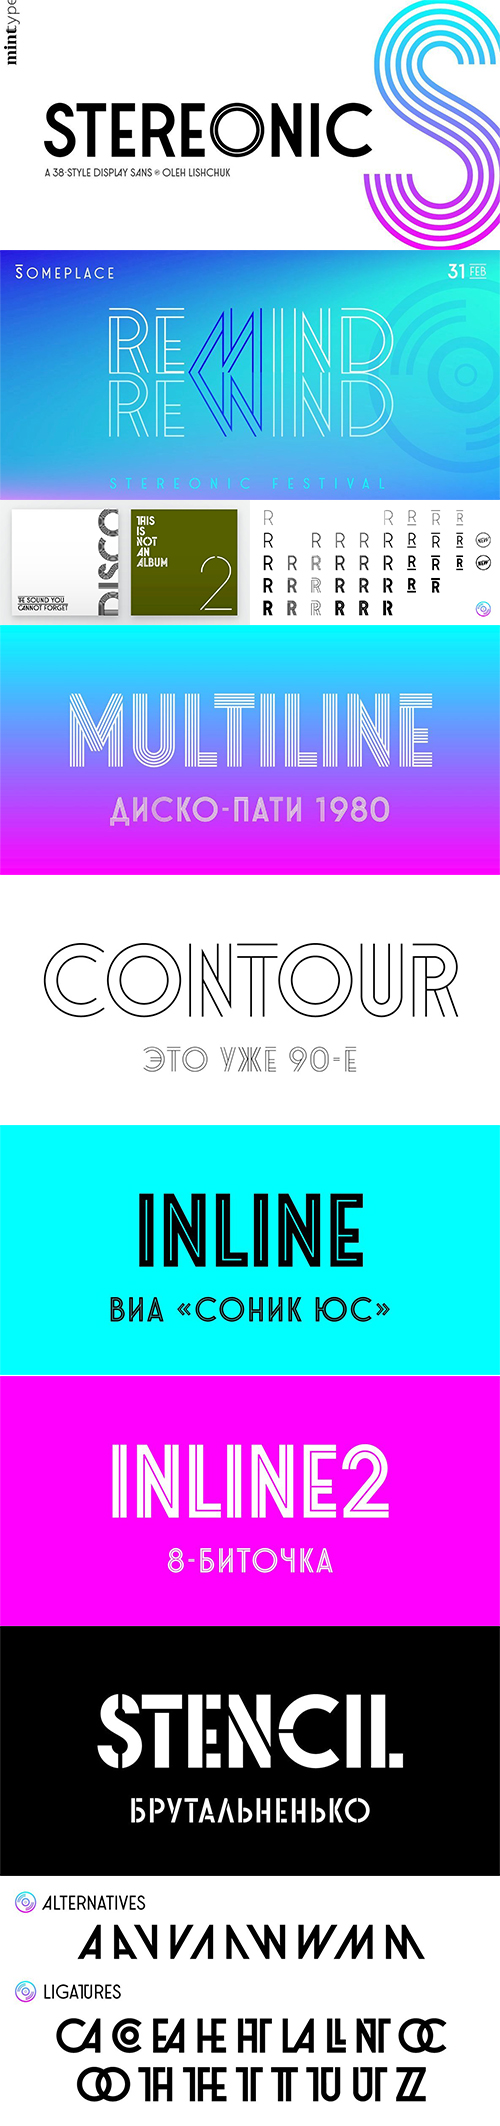 Stereonic font family